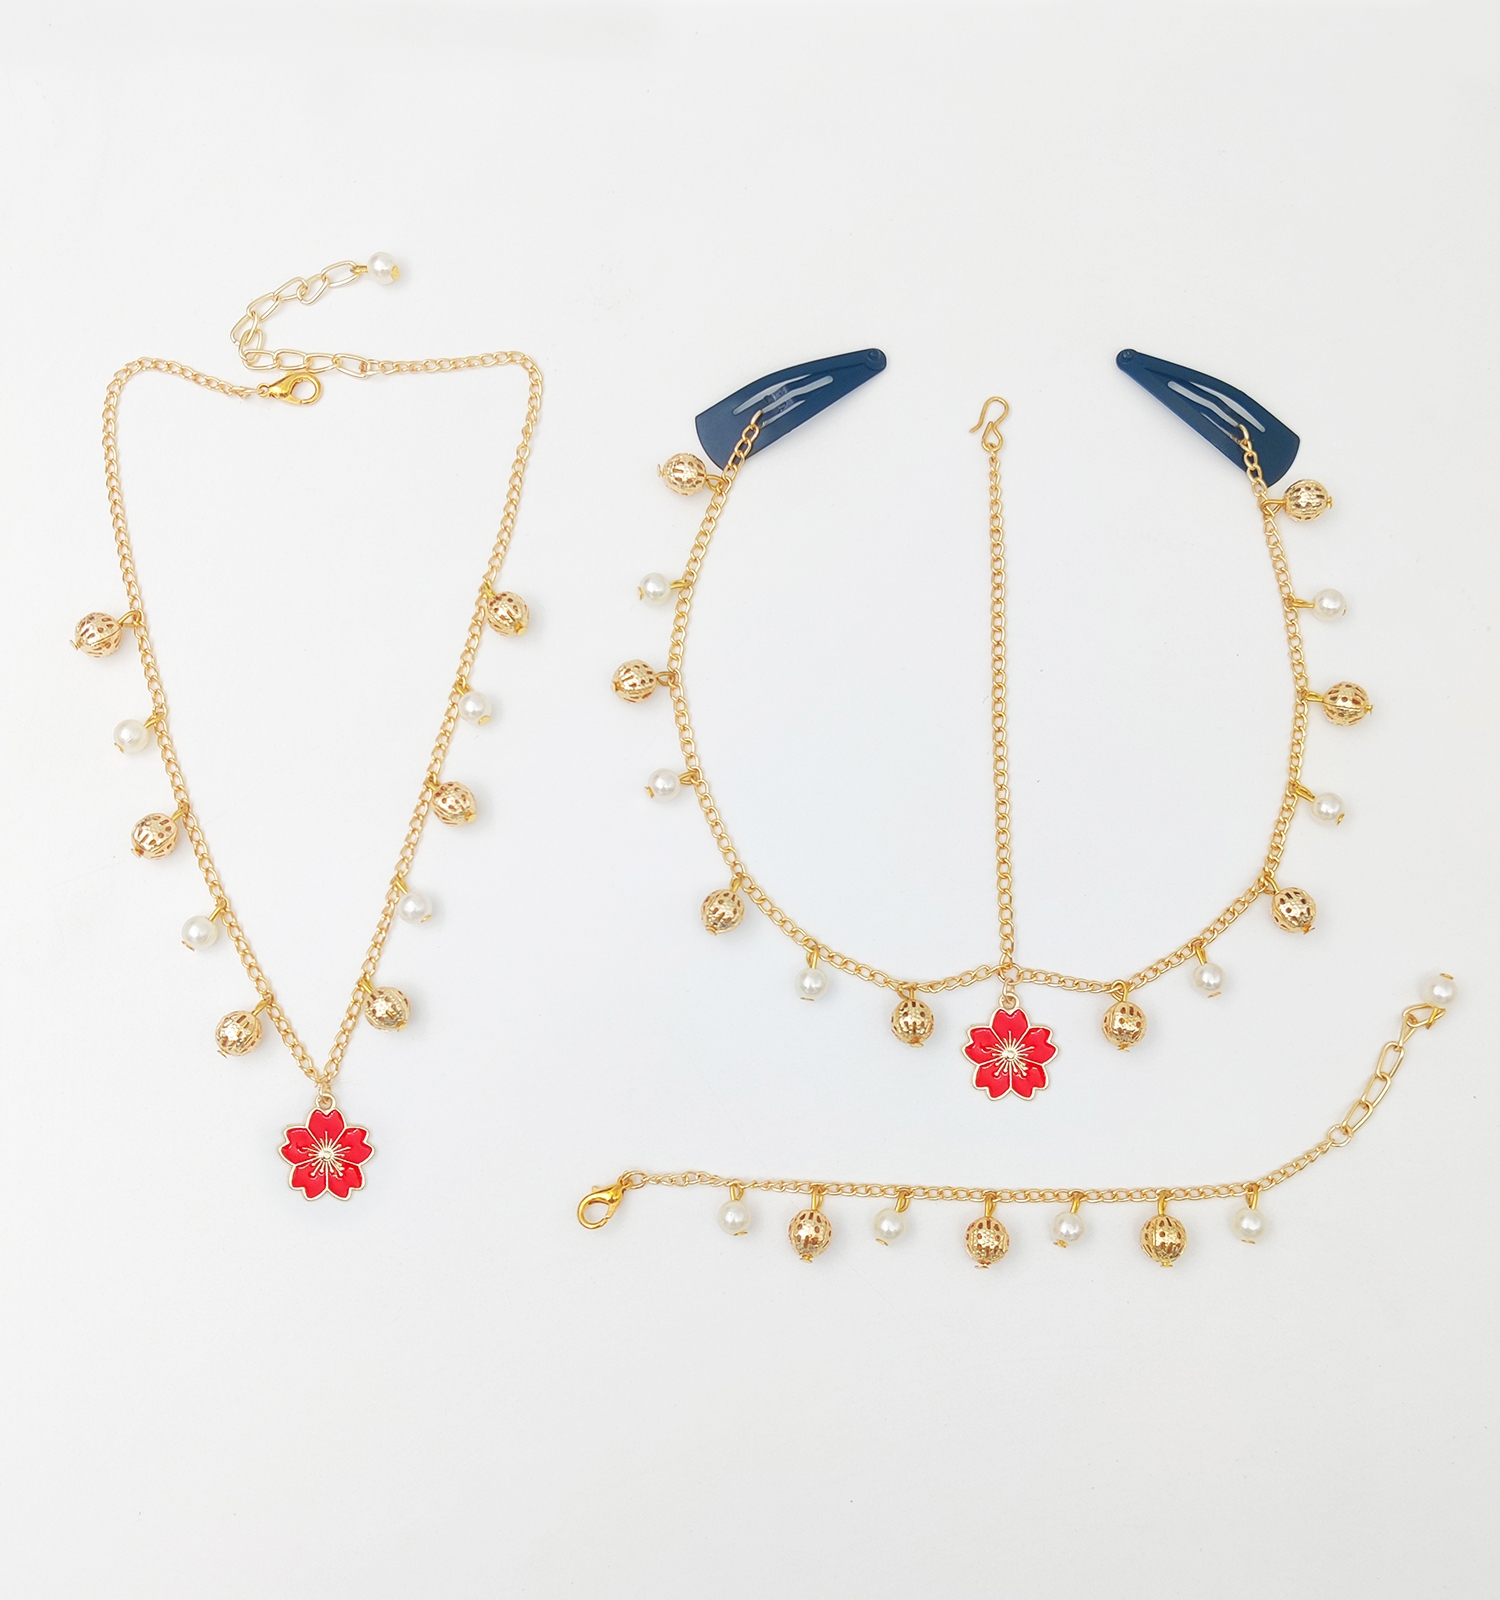 Lily  Charmed Necklace, Bracelet & Head Chain Set - Red